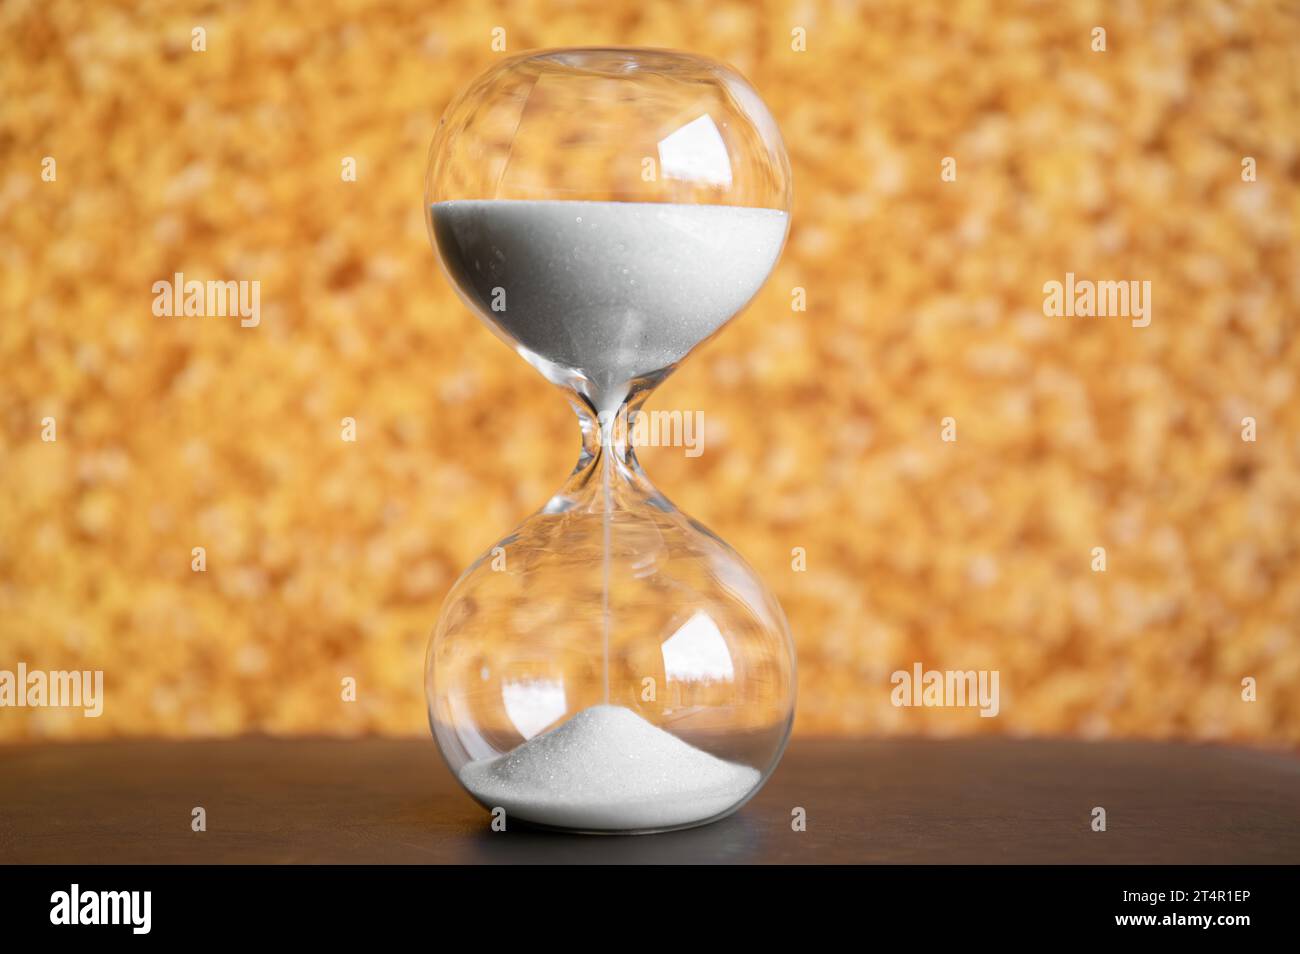 Hourglass with white sand dripping against gold color glitter background indoors. Stock Photo